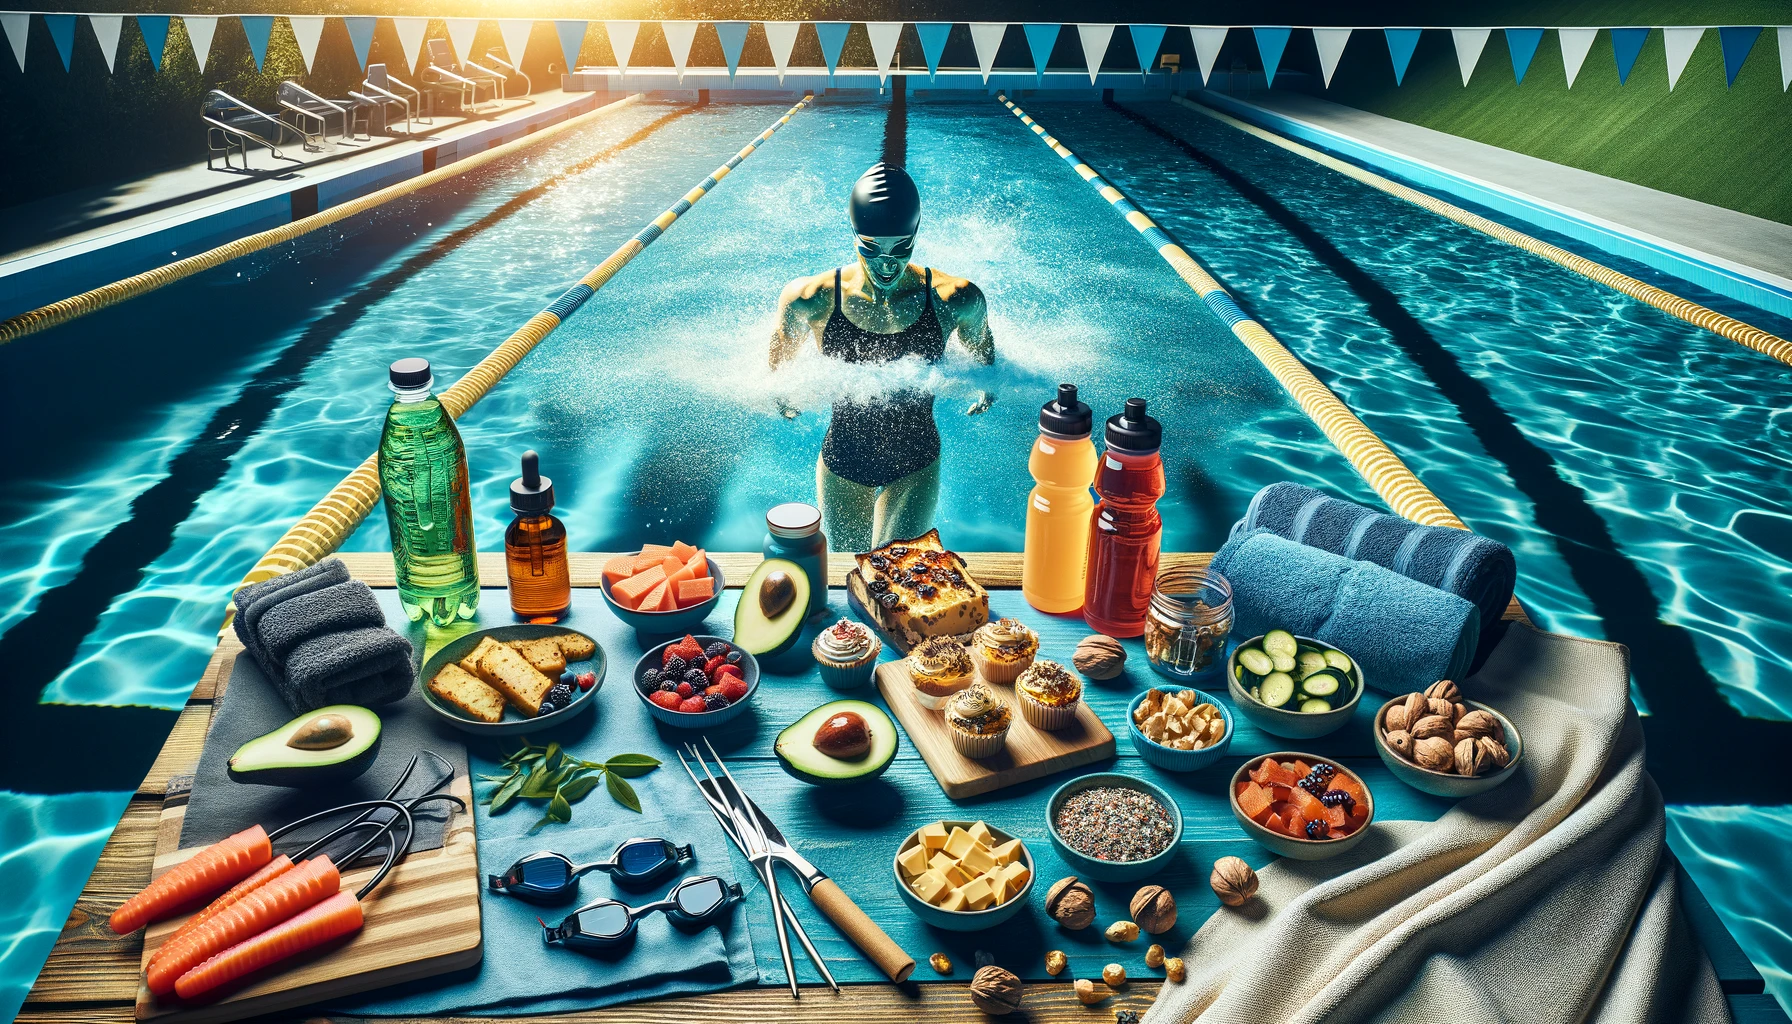 This image captures the preparation and recovery aspects of swimming on a keto diet, showcasing keto-friendly foods and hydration options